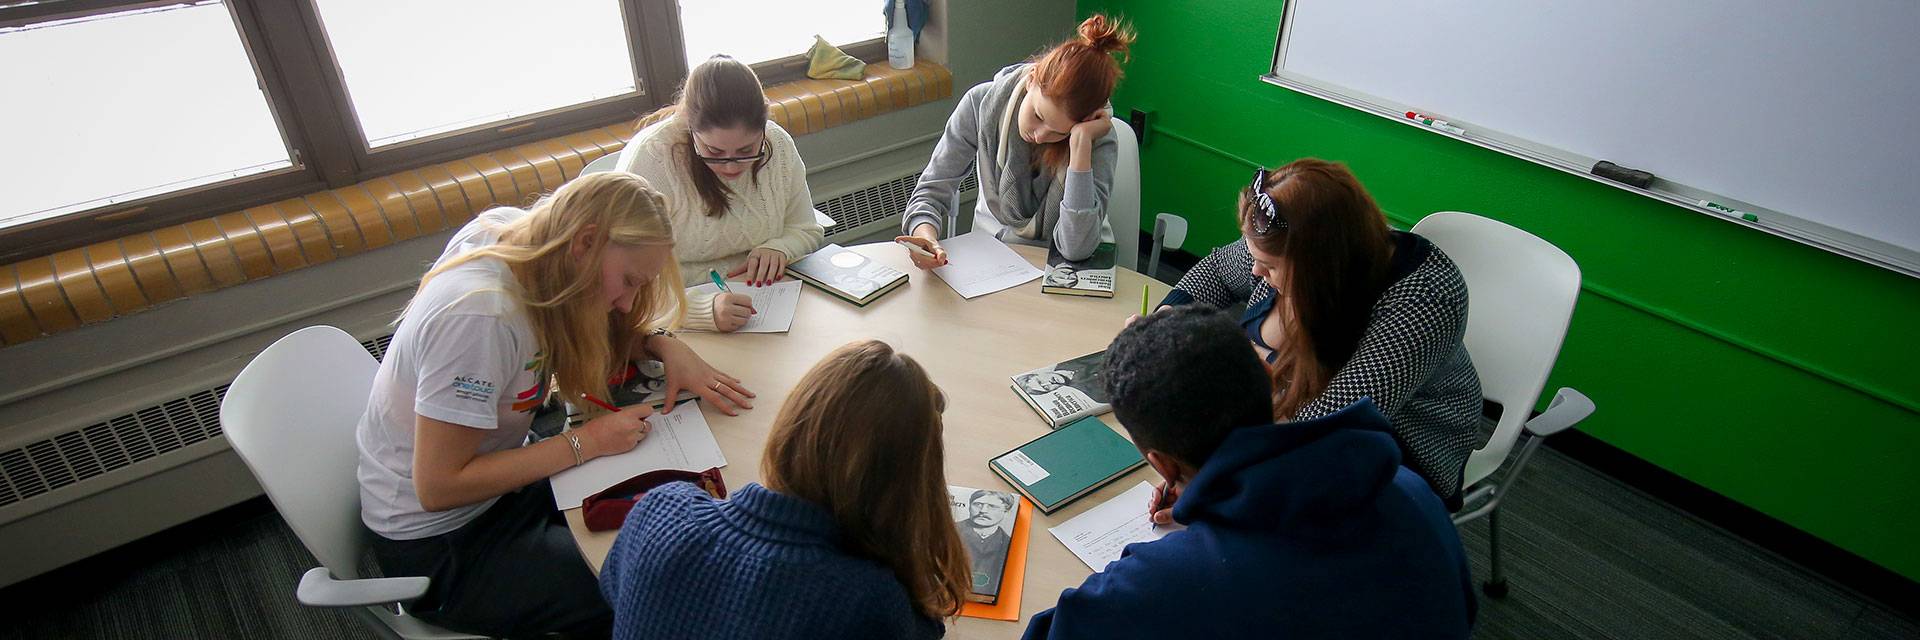 Students working at table